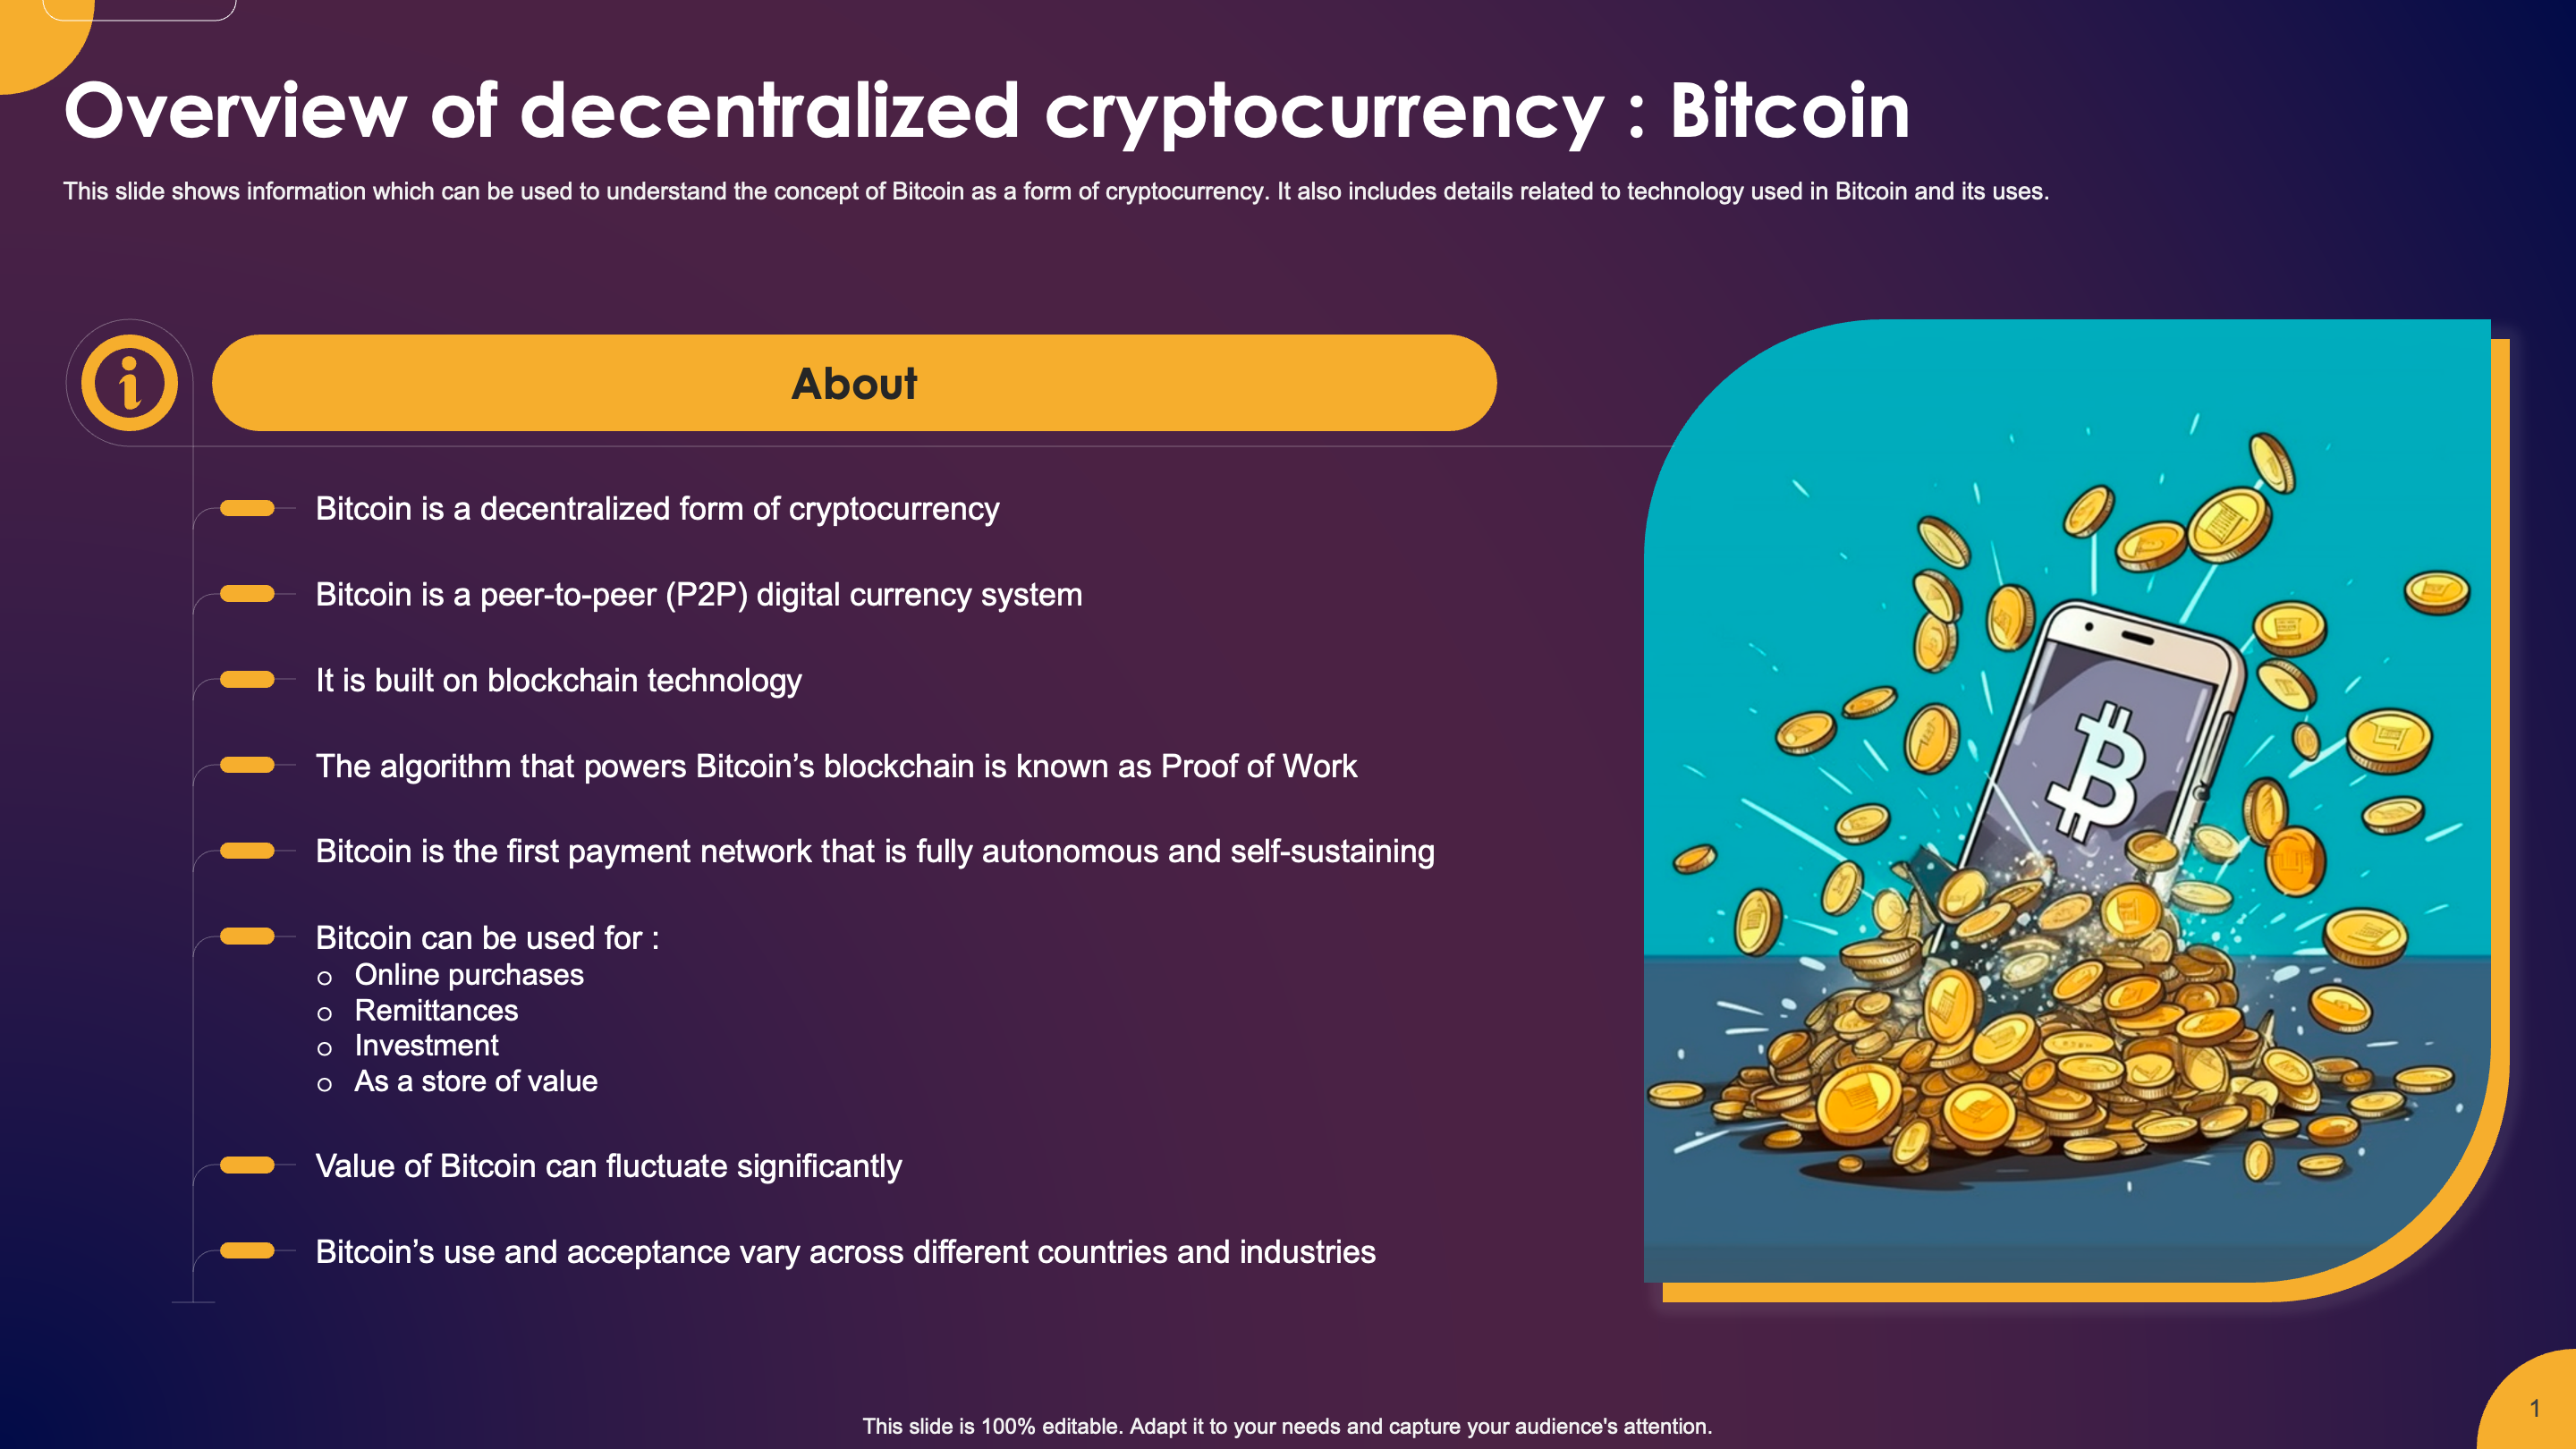 Overview of decentralized cryptocurrency : Bitcoin